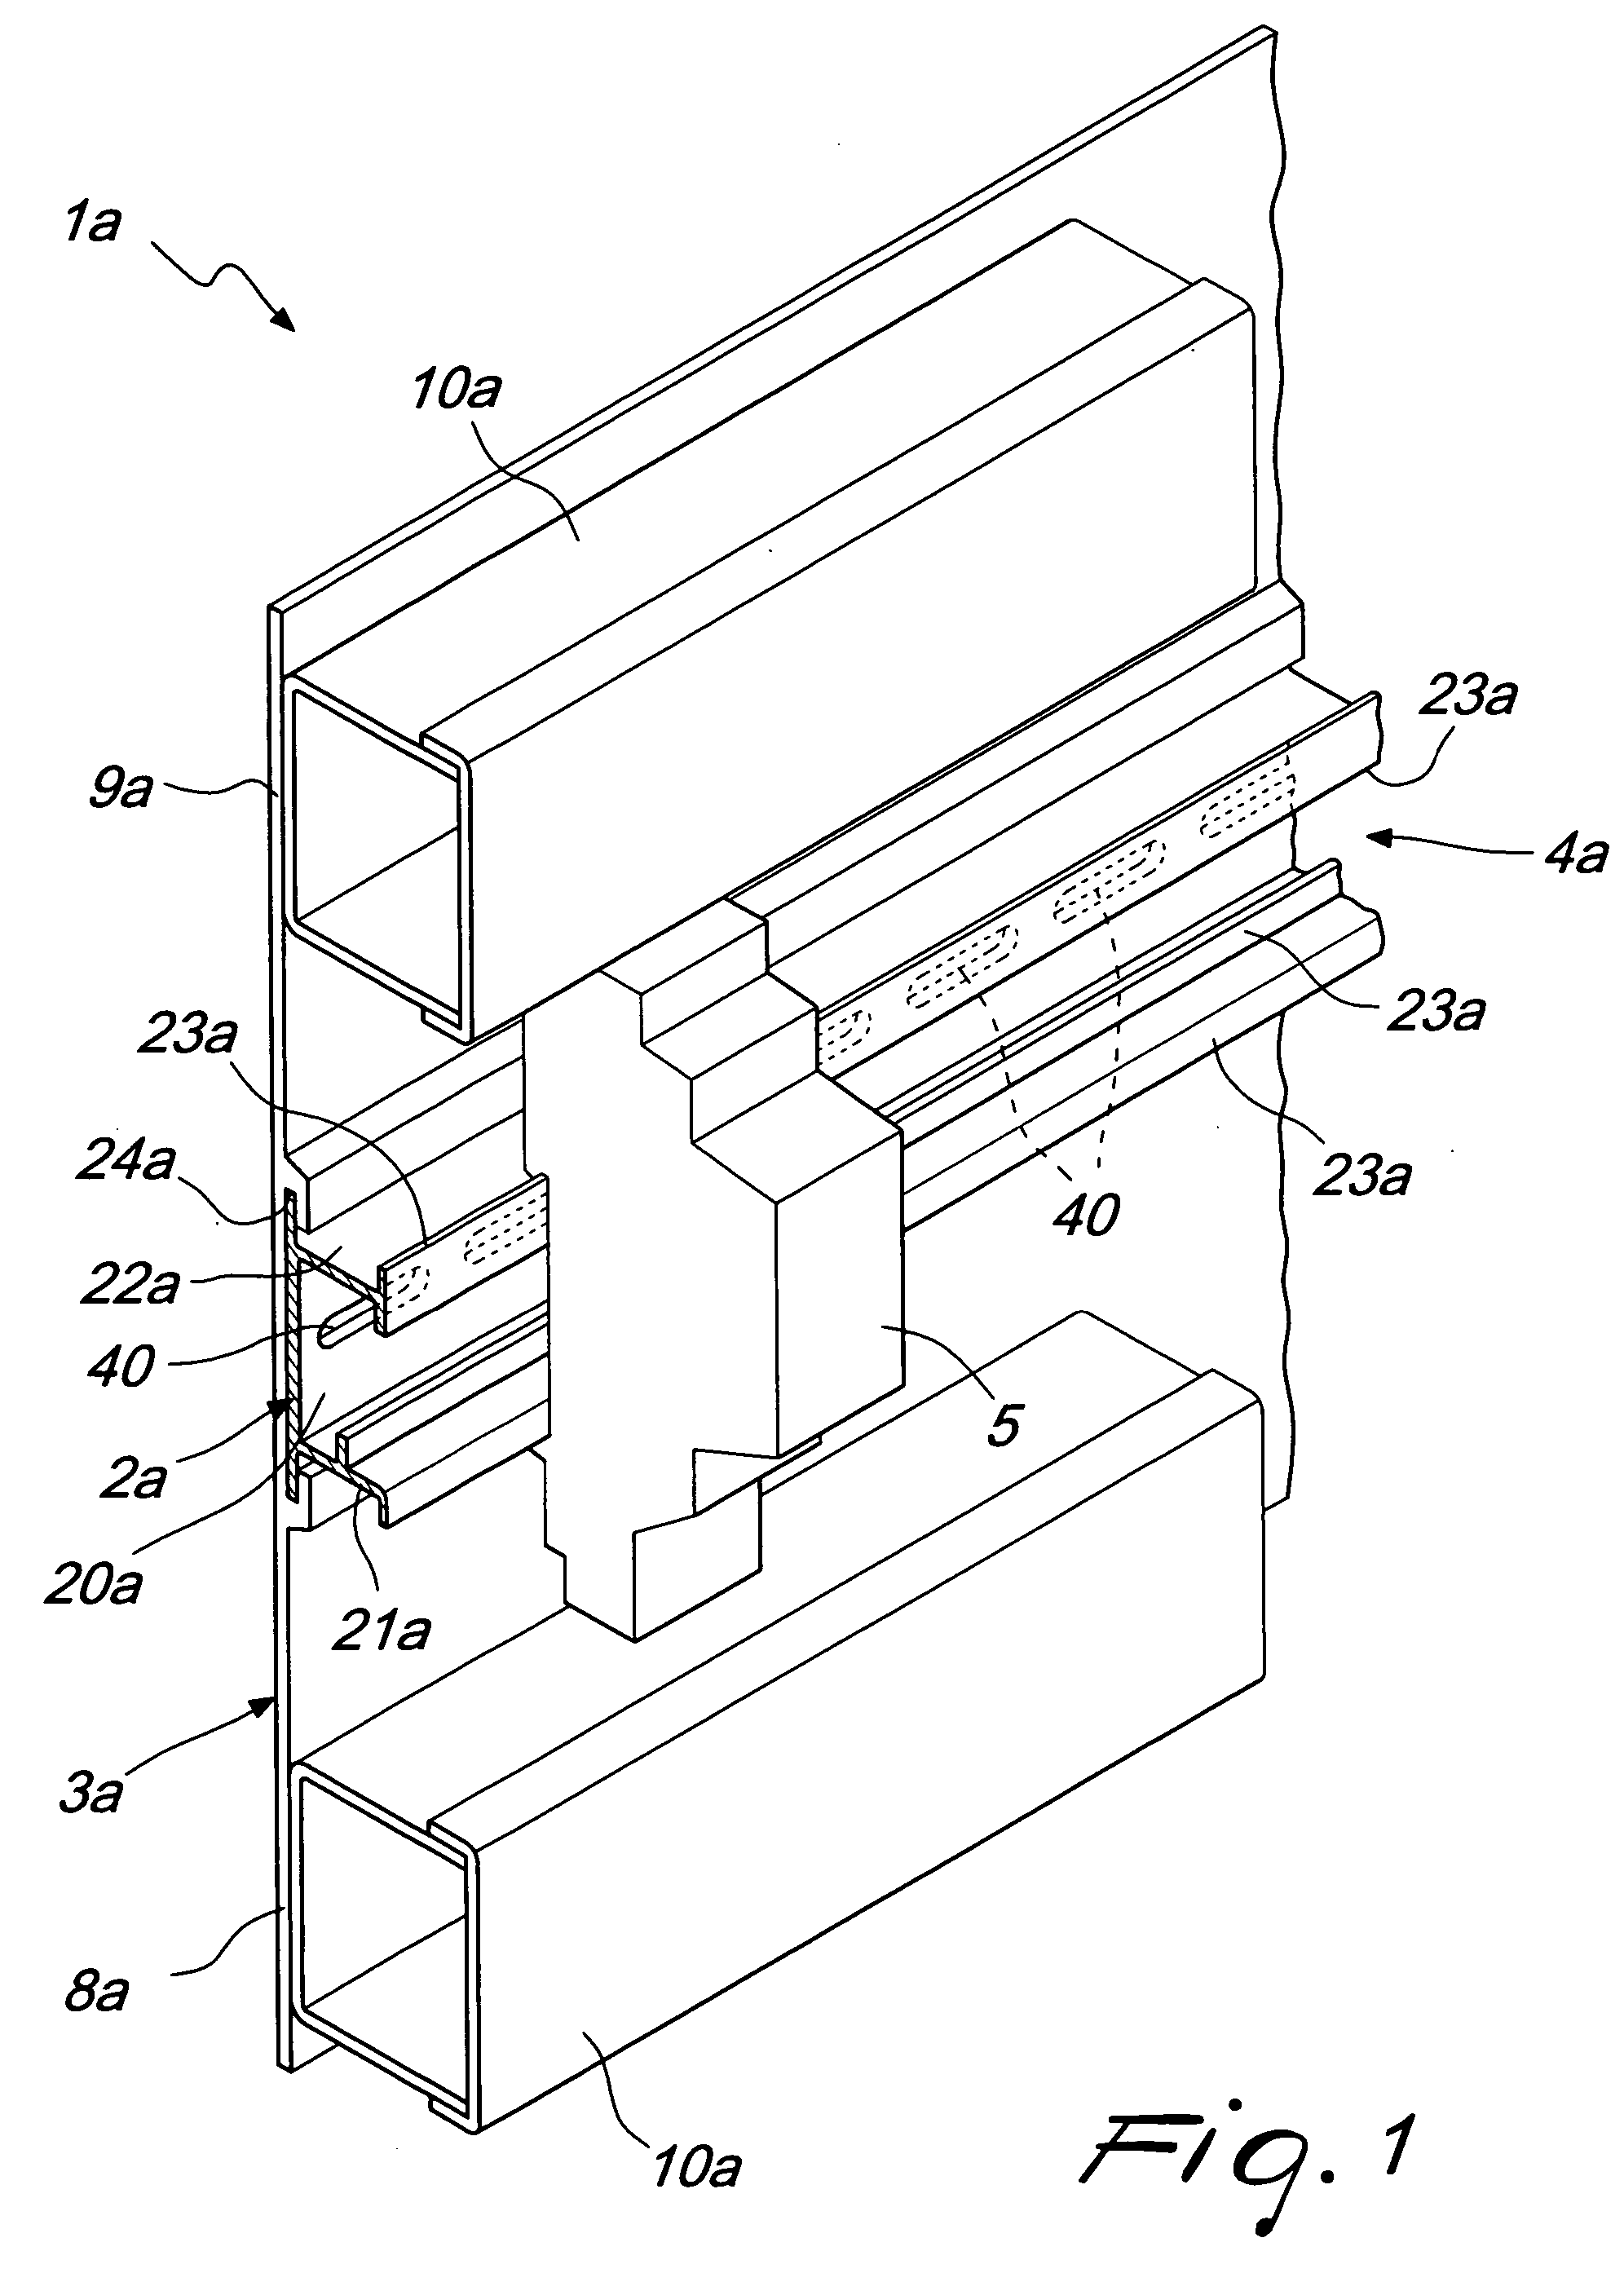 Device for supporting electrical components and wiring accessories